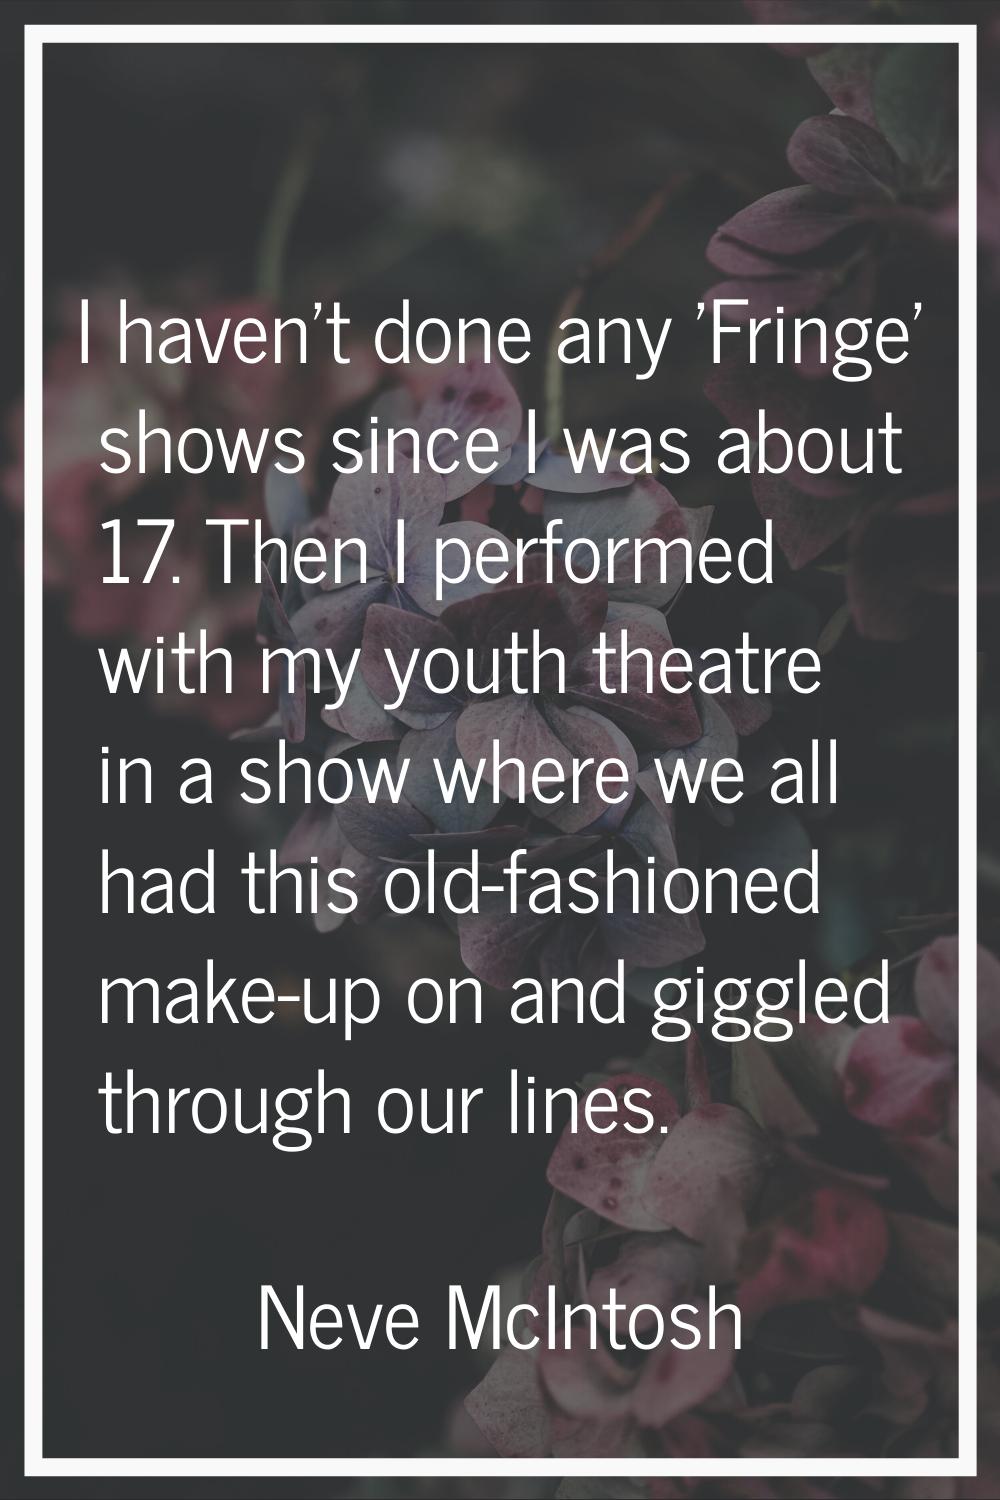 I haven't done any 'Fringe' shows since I was about 17. Then I performed with my youth theatre in a